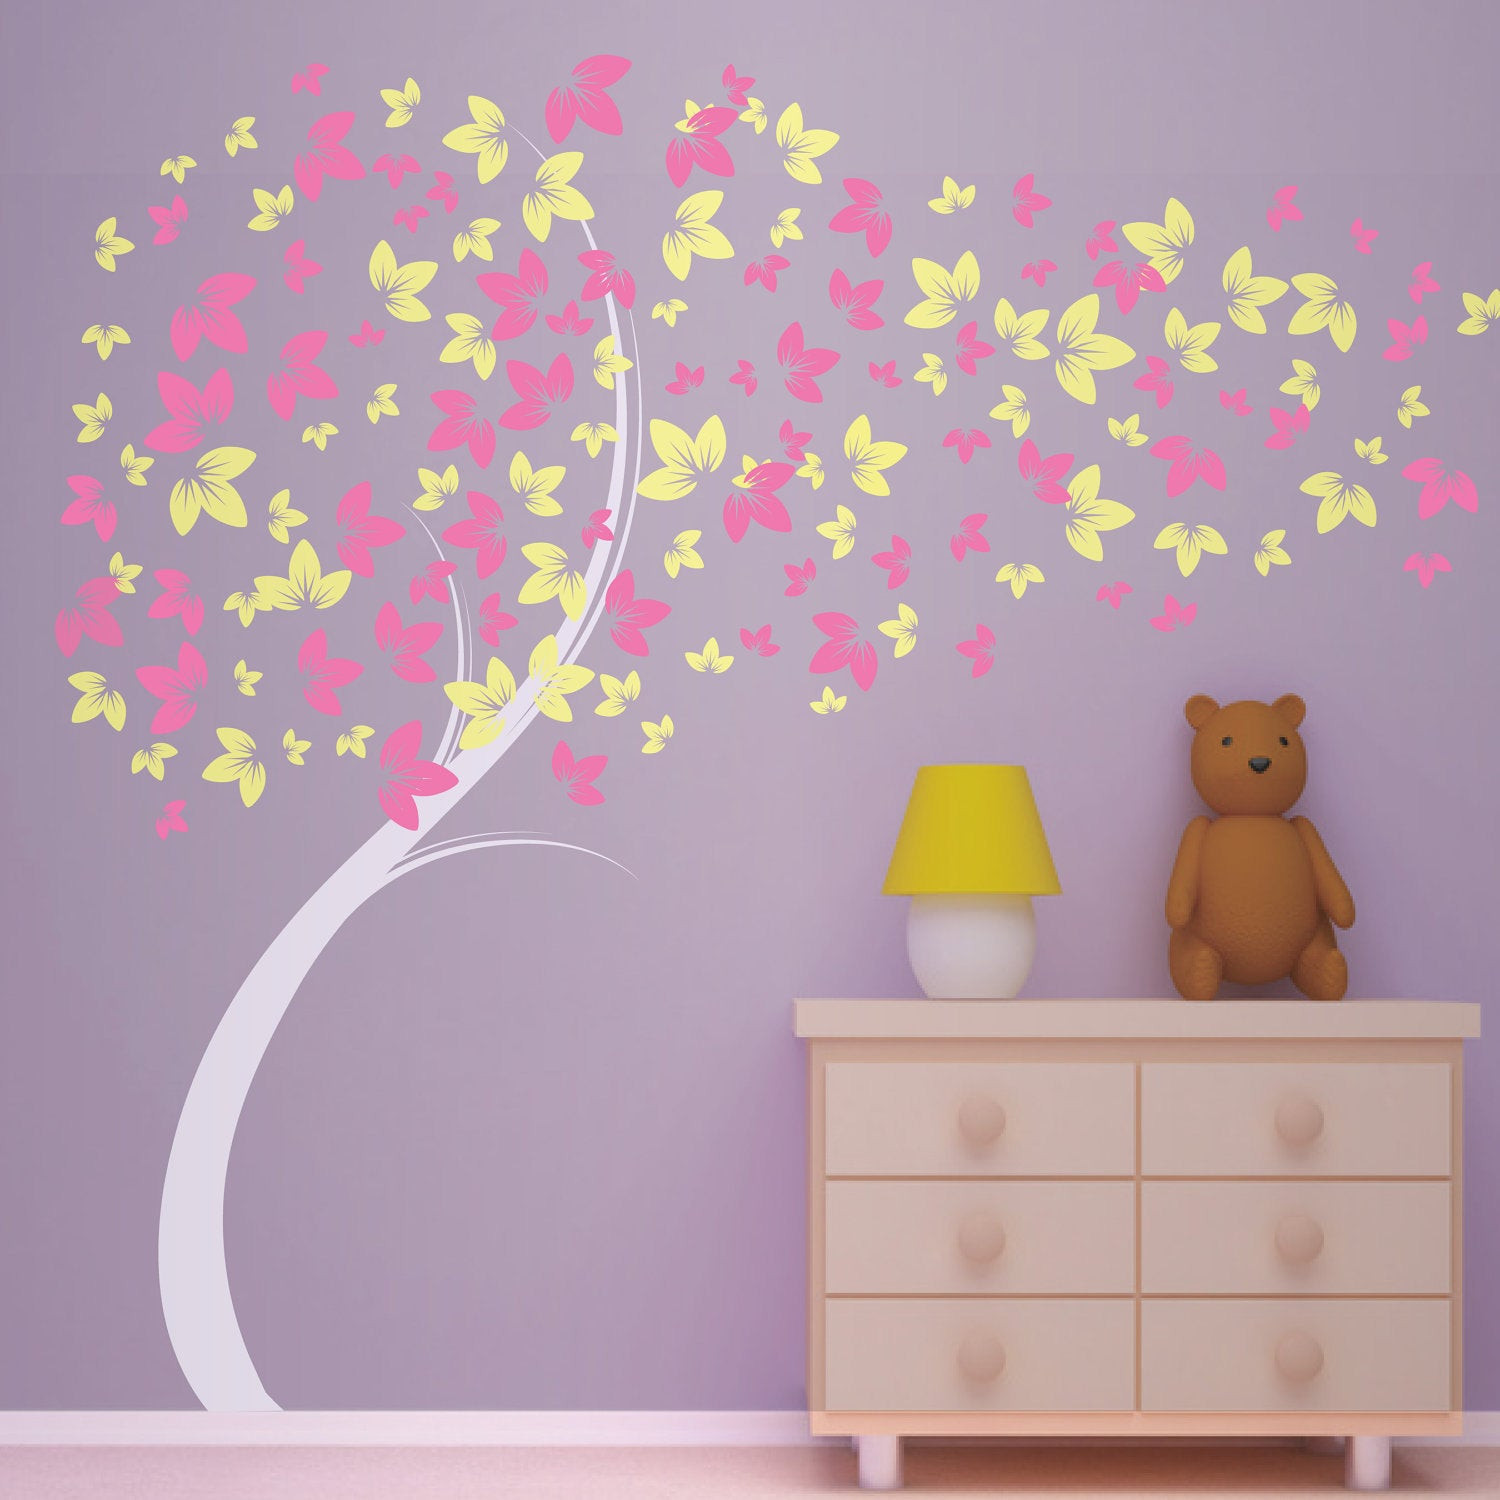 Girl Bedroom Wall Art
 Curvy Blowing Tree Vinyl Wall Decal Great for little